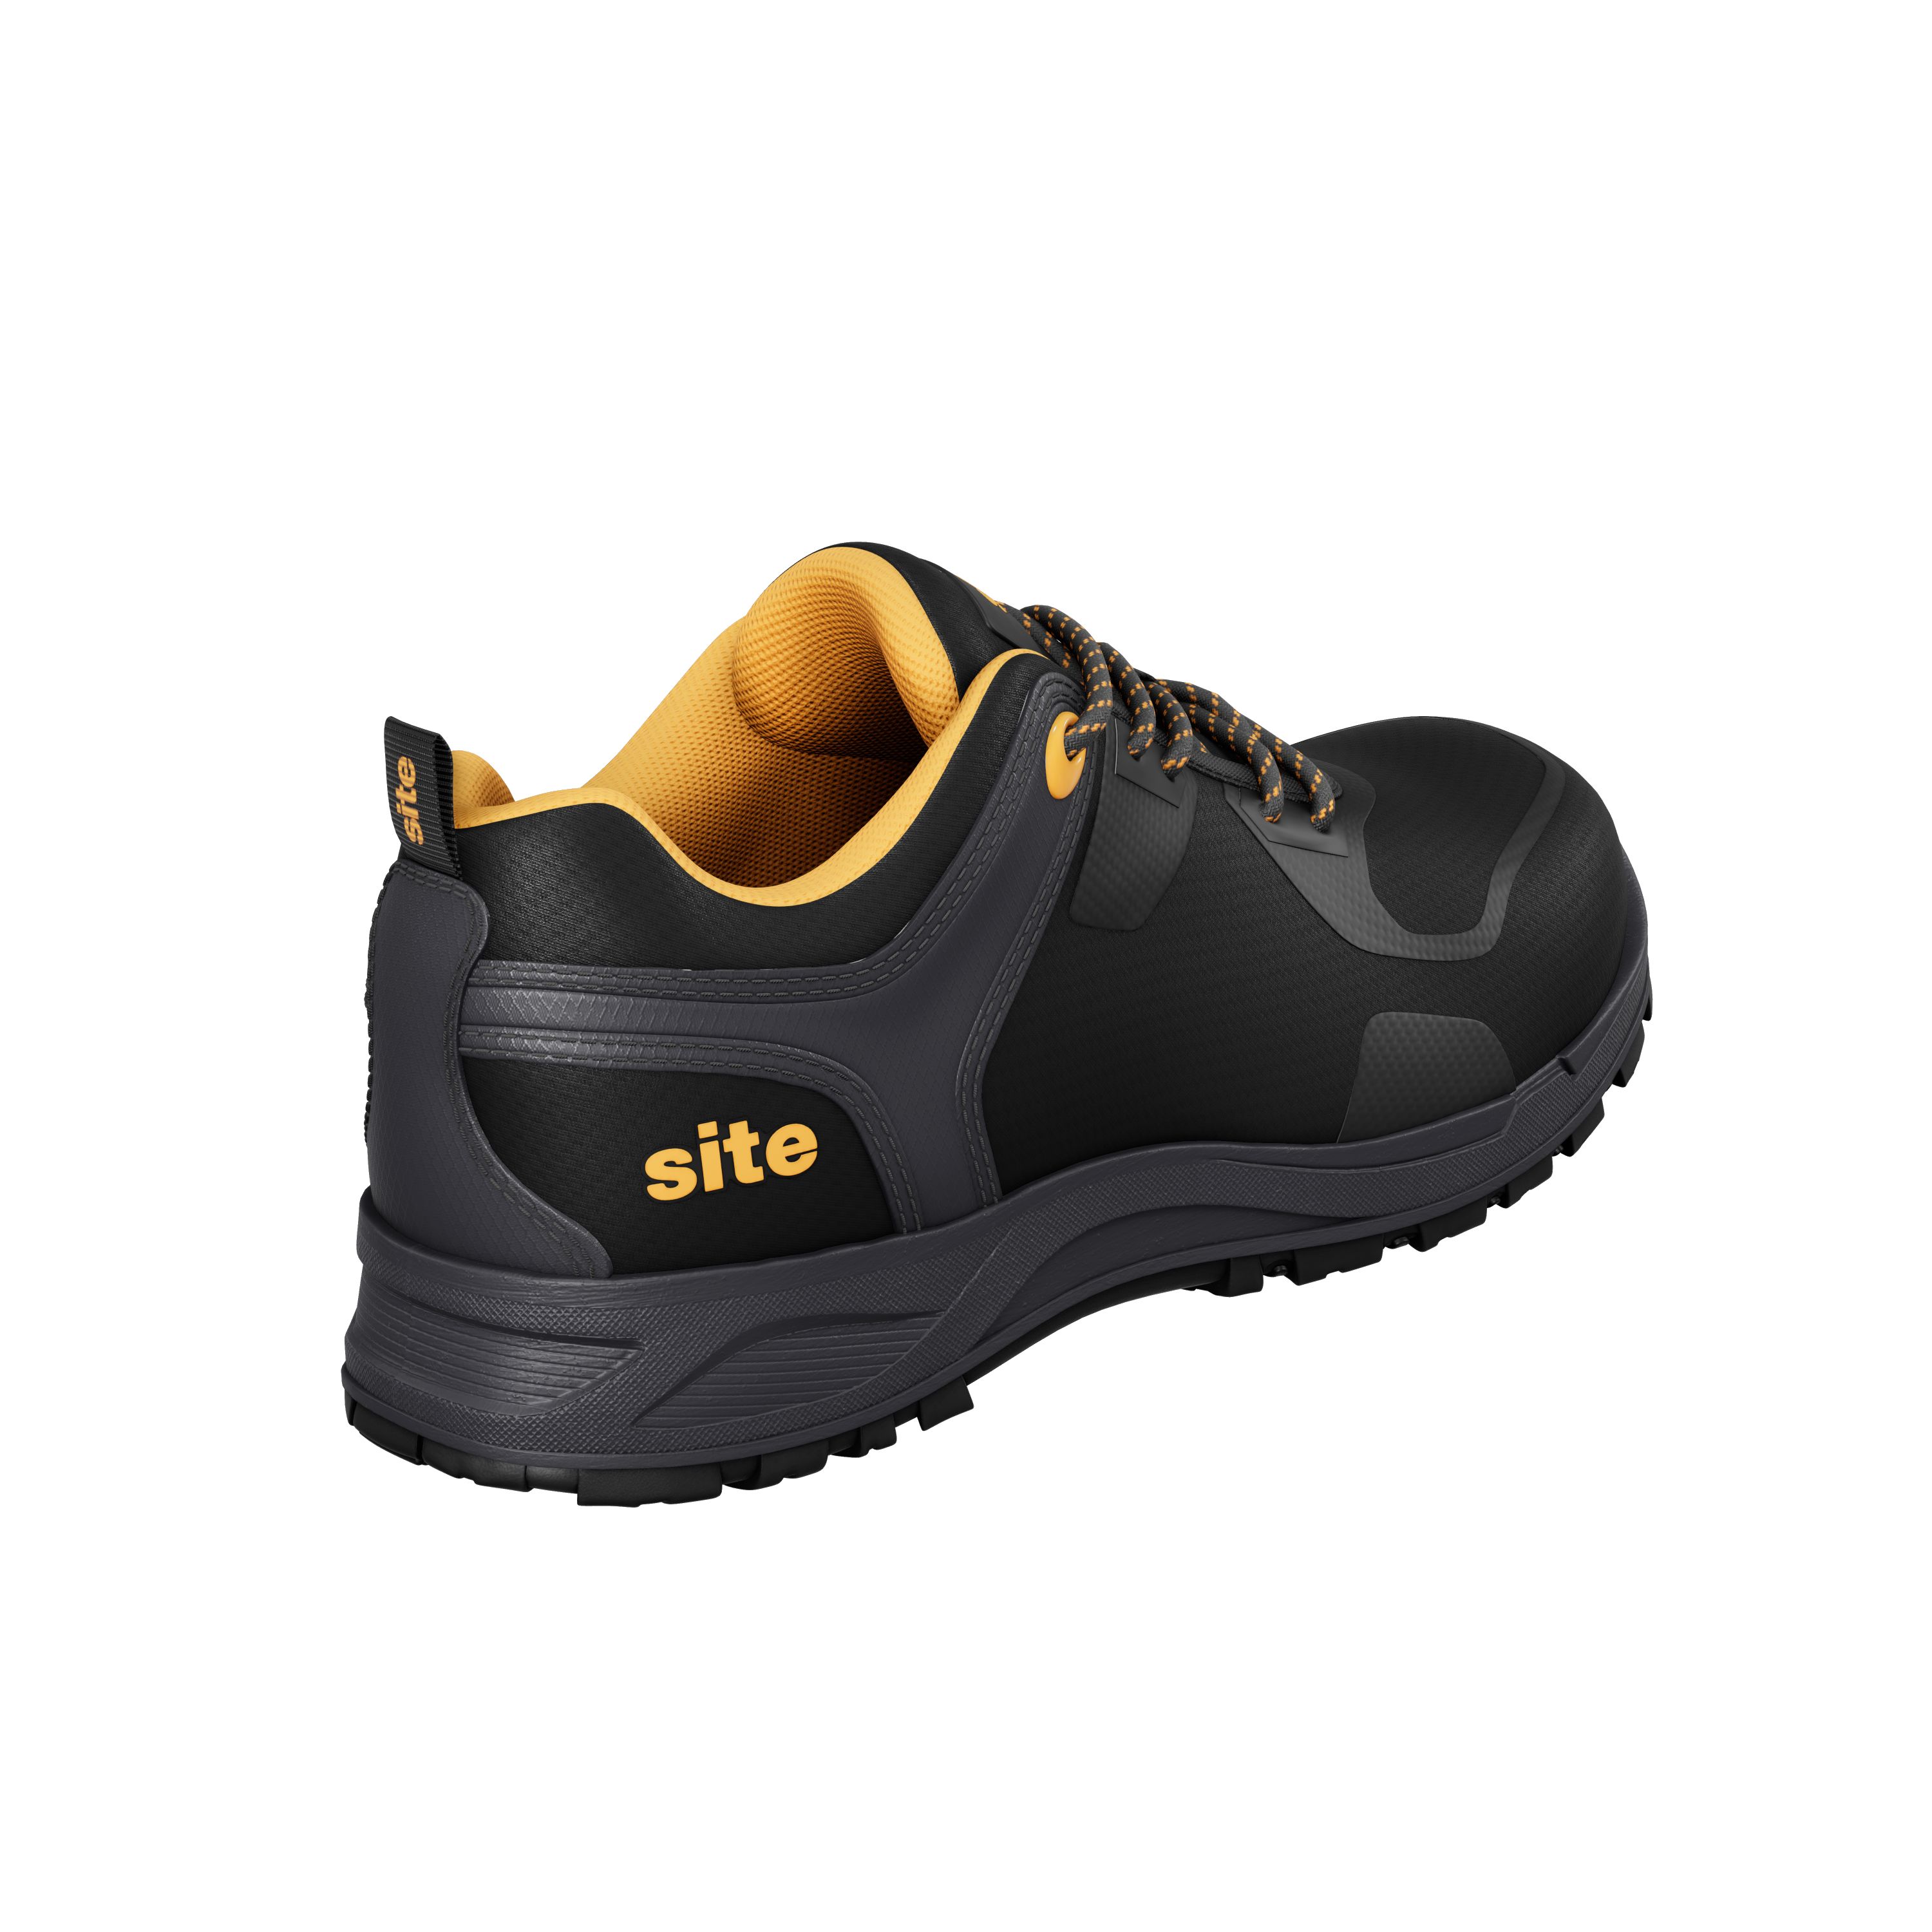 Site Haydar Black Safety trainers, Size 6